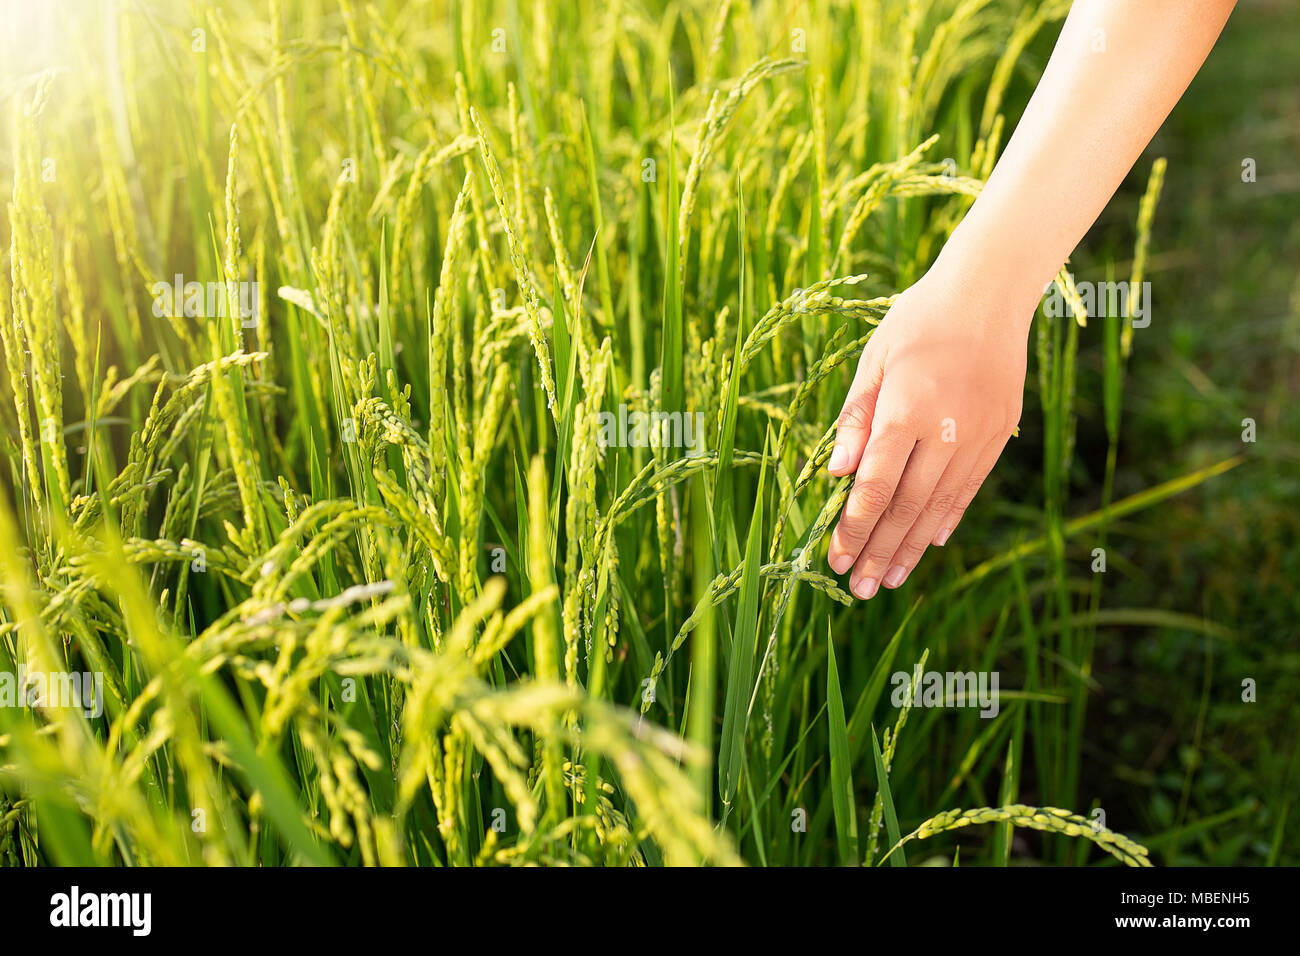 hand tenderly touching a young rice in the paddy field Stock Photo